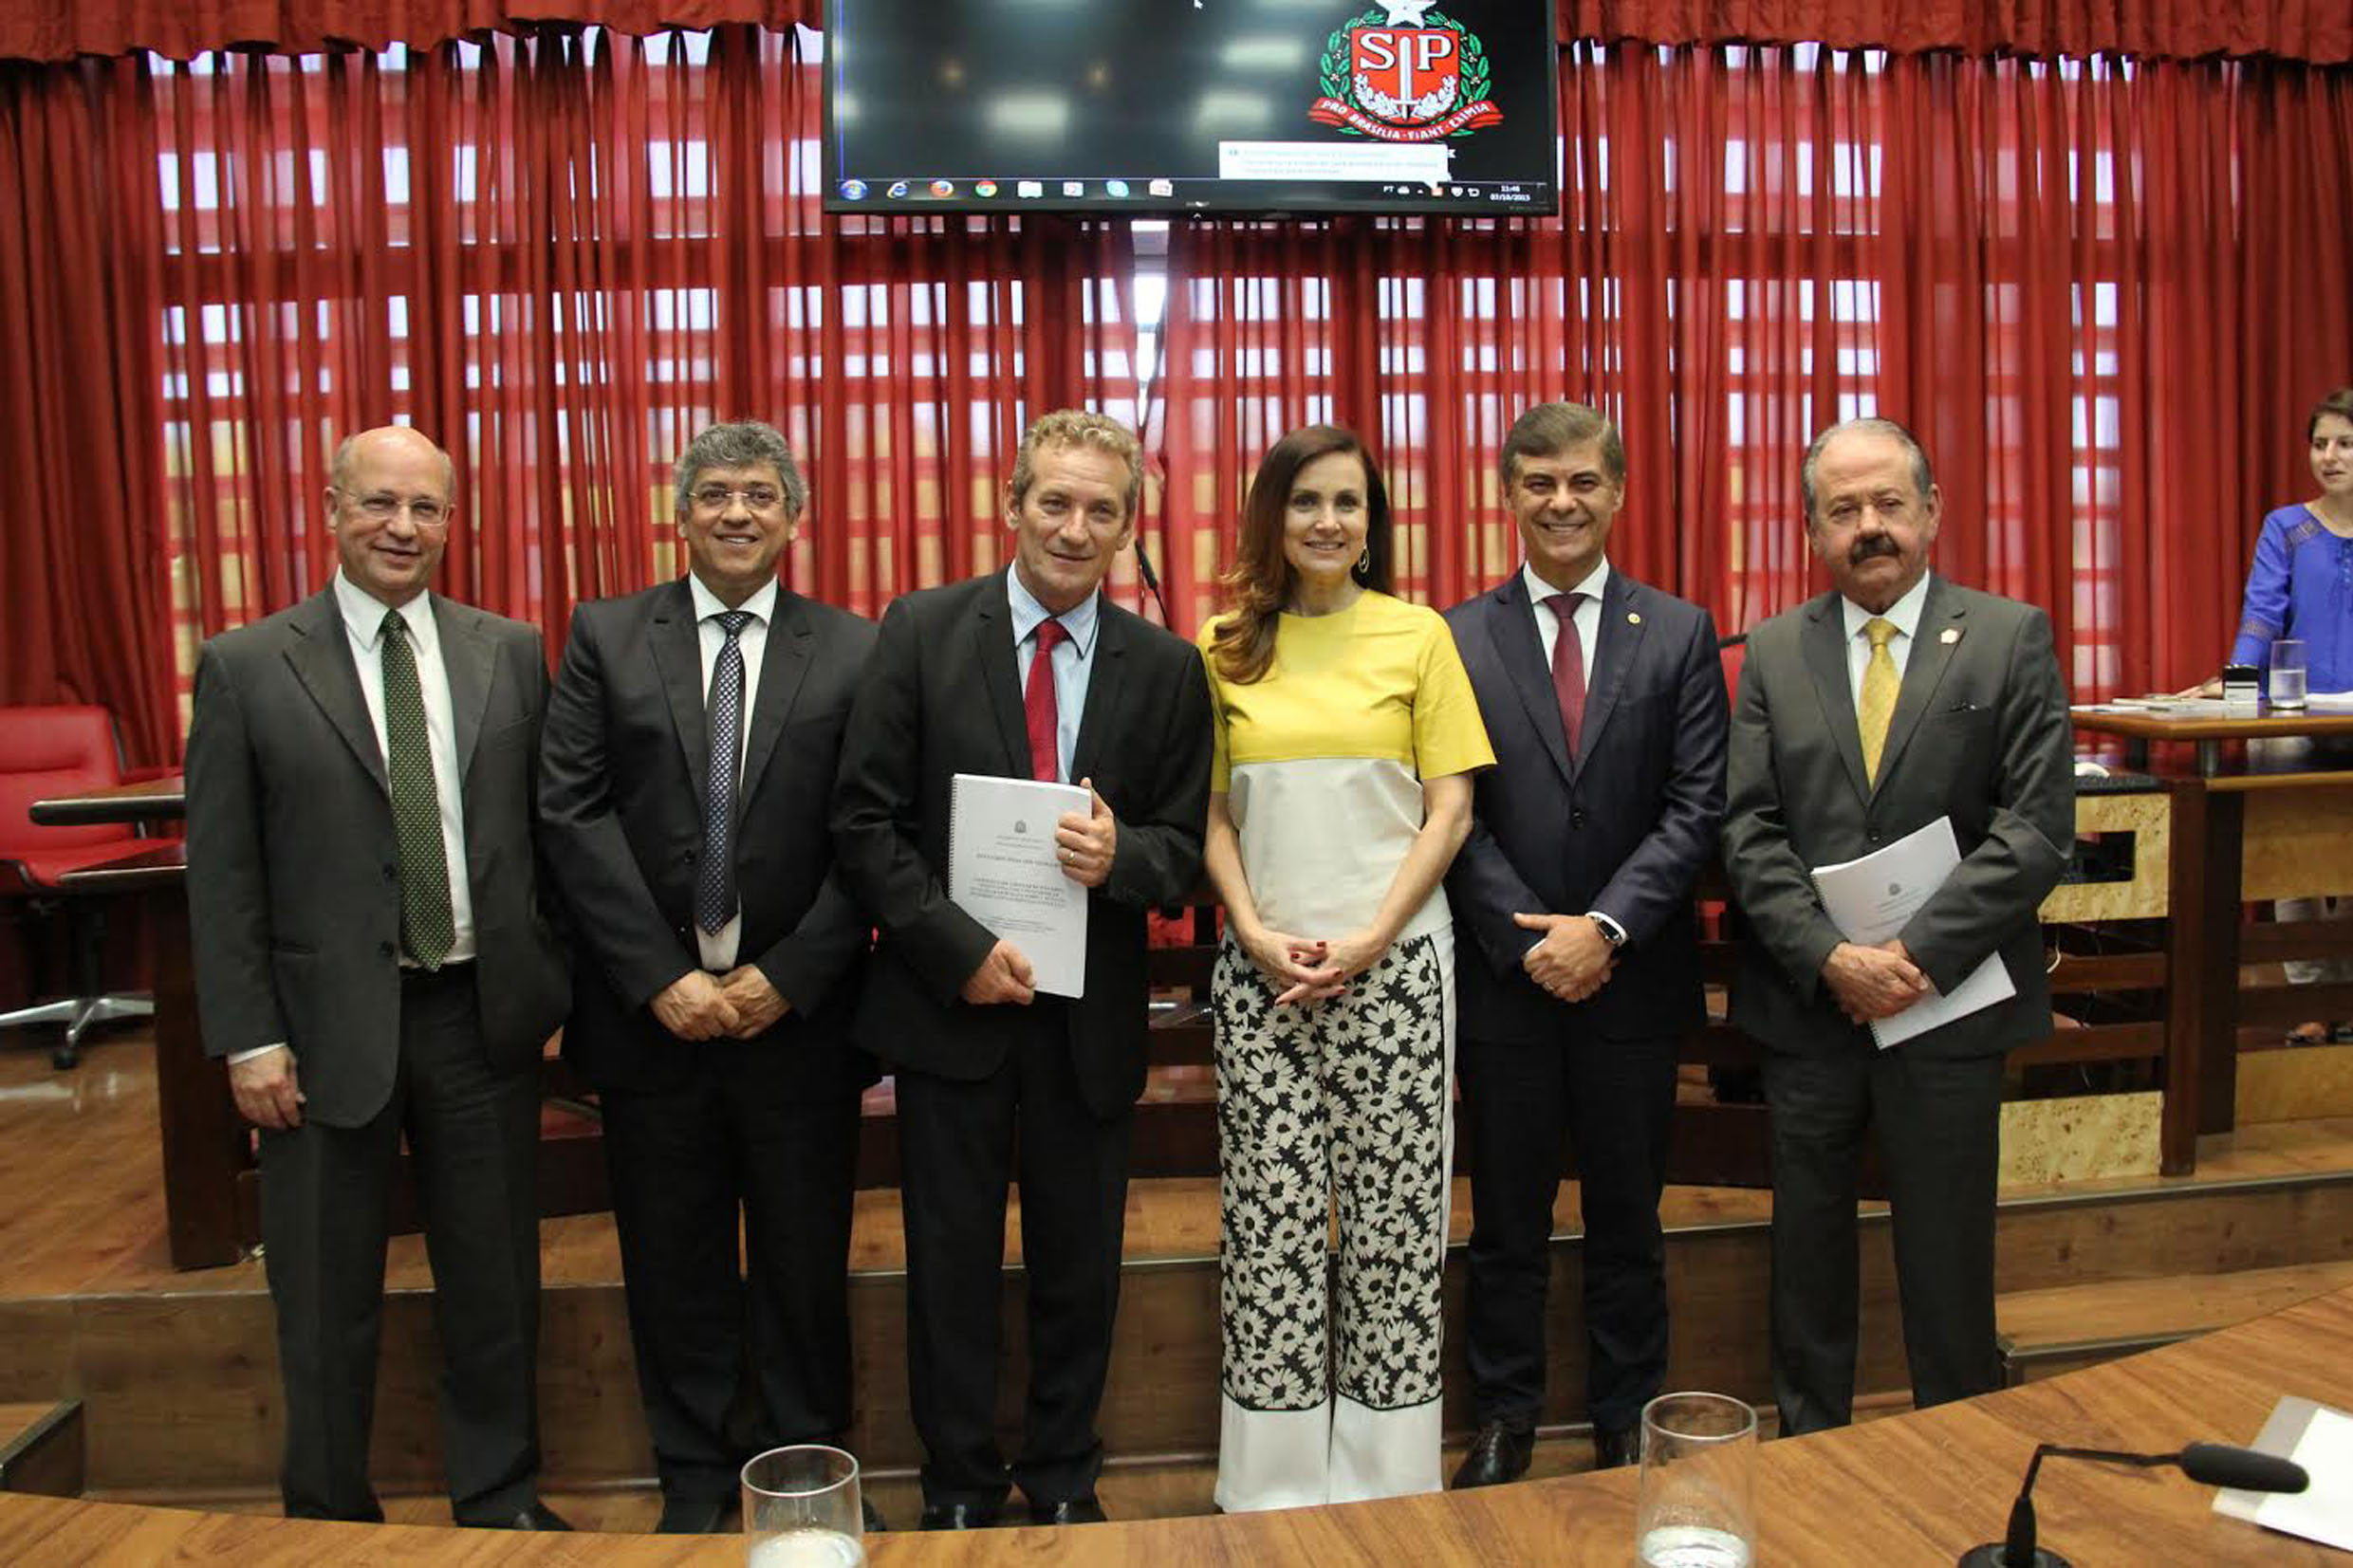 Carlos Neder, Padre Afonso, Ed Thomas, Analice Fernandes, Gil Lancaster e Celso Giglio<a style='float:right;color:#ccc' href='https://www3.al.sp.gov.br/repositorio/noticia/N-10-2015/fg176830.jpg' target=_blank><i class='bi bi-zoom-in'></i> Clique para ver a imagem </a>